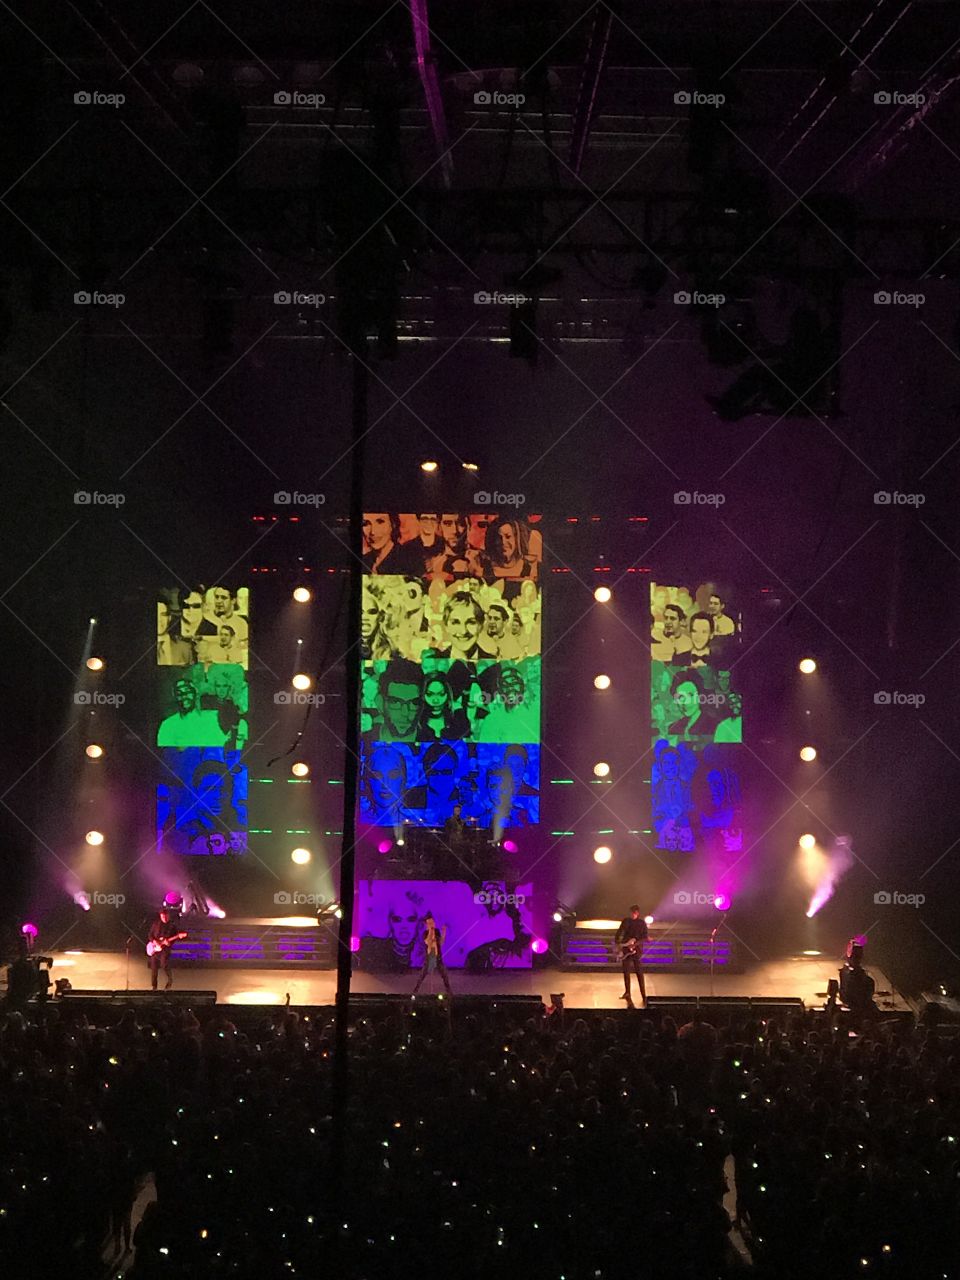 Taken at the Panic! At the Disco concert in Cleveland, Ohio at The Wolstein Center.